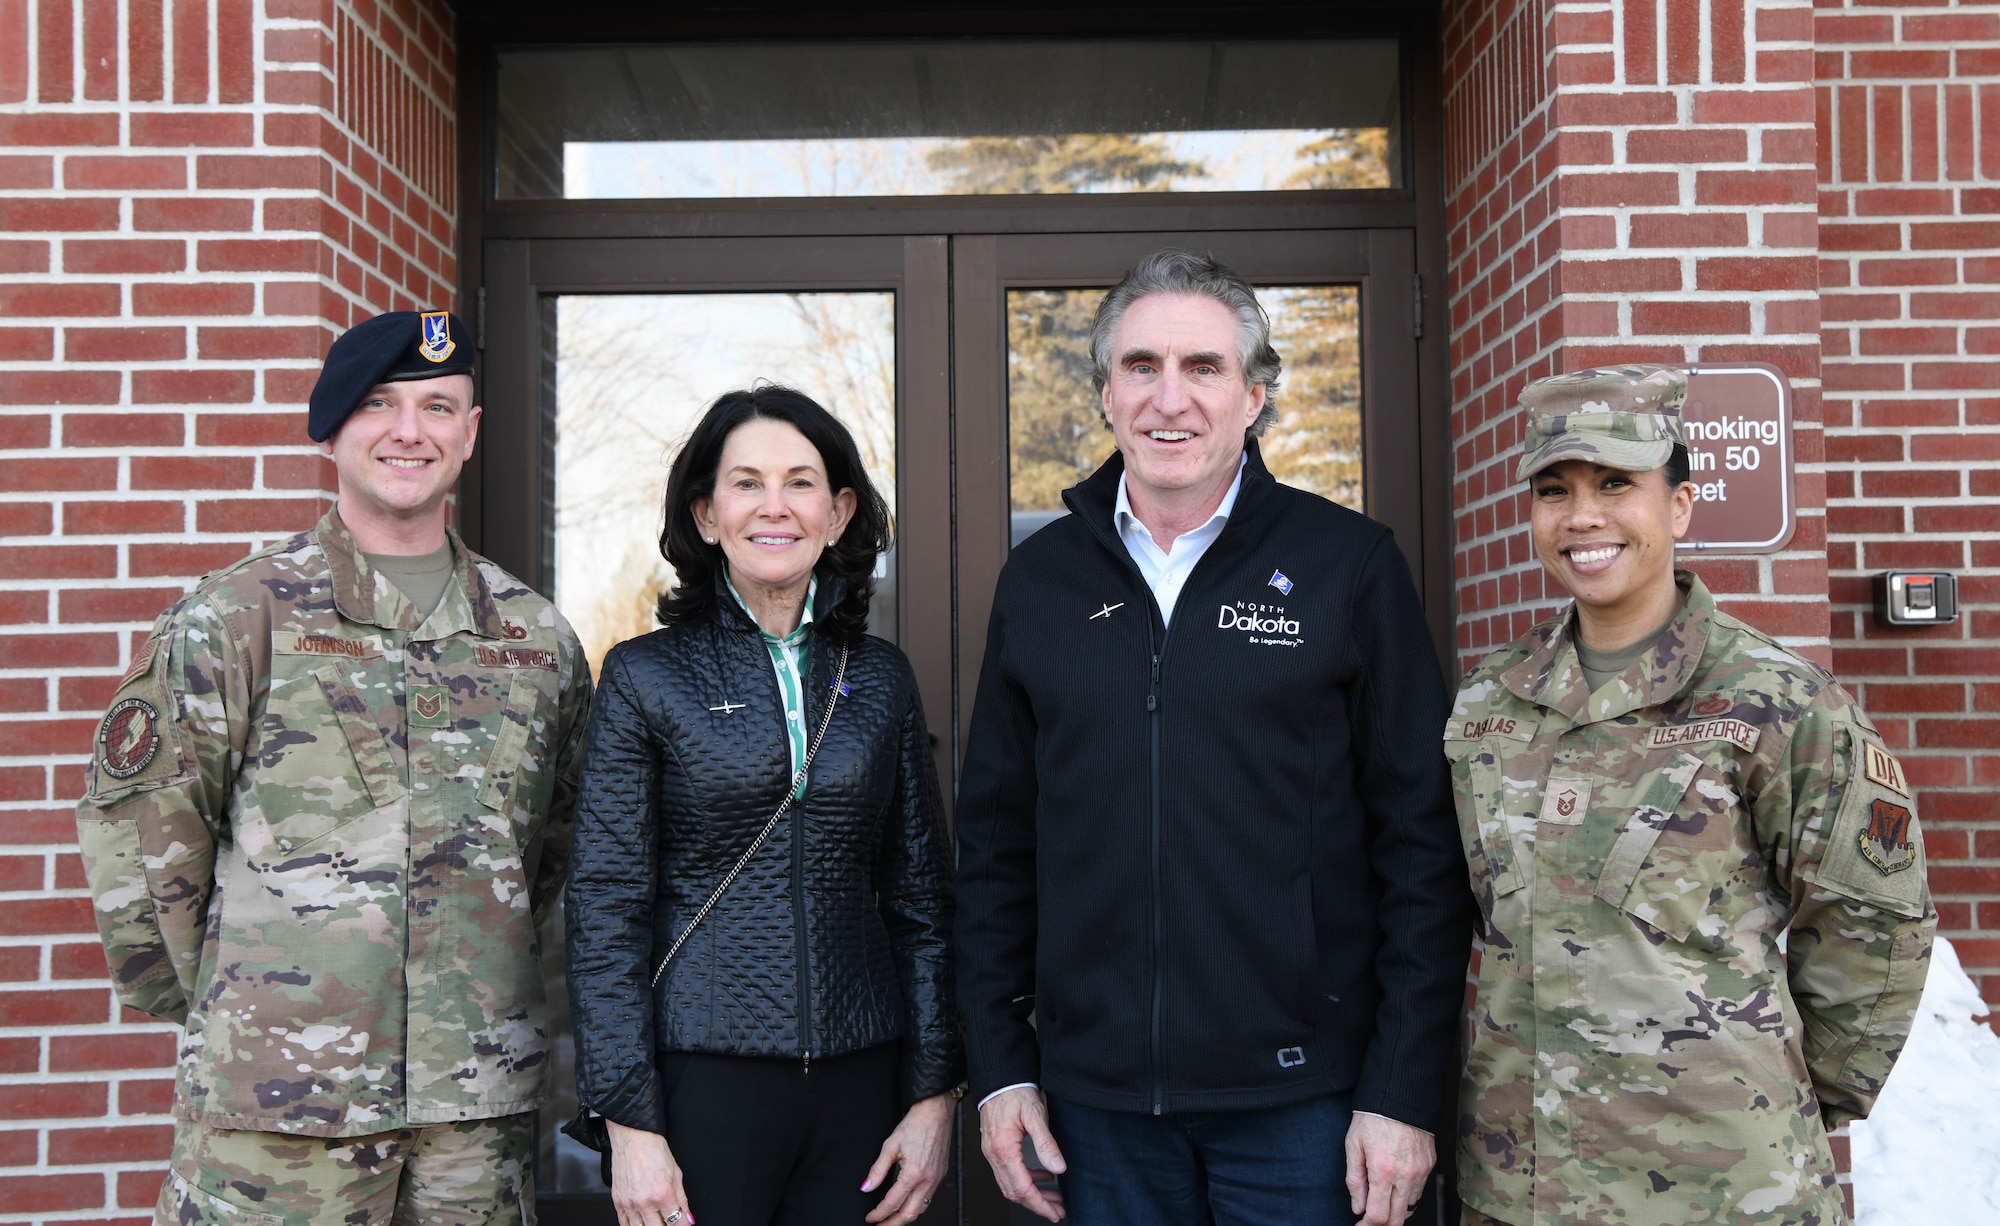 Two military members pose for a photo with two others in front of a building.